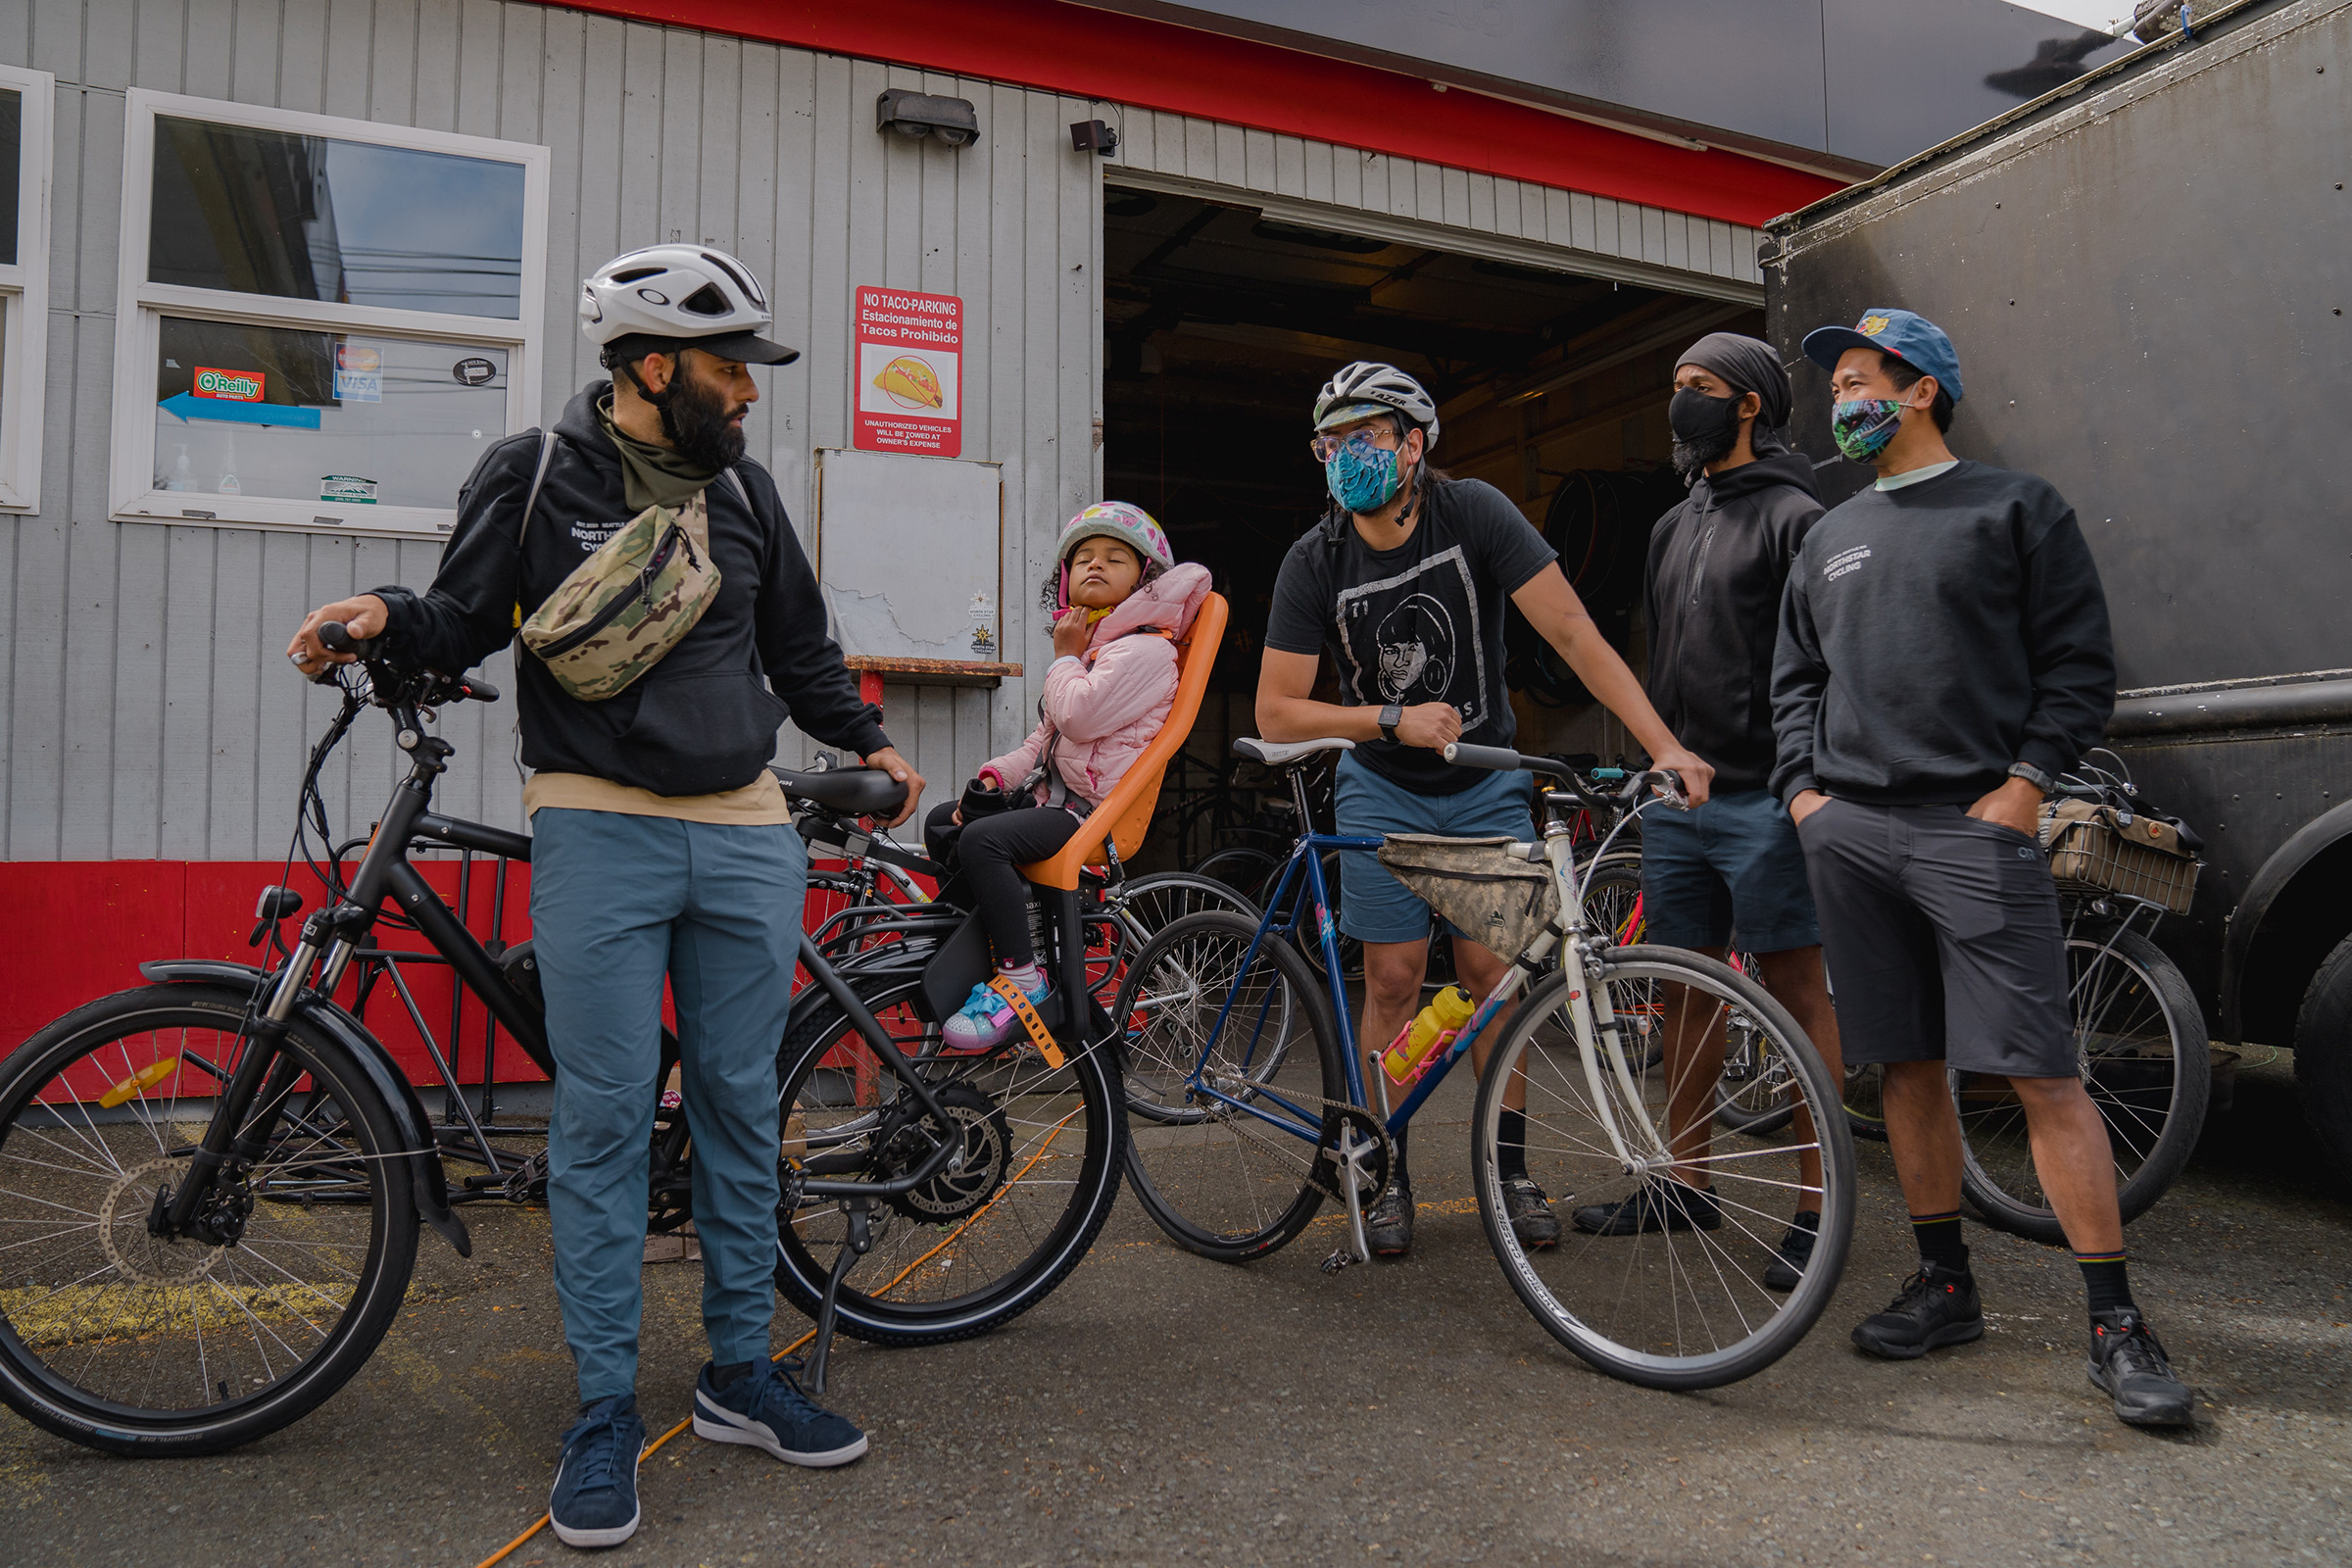 Edwin Lindo, left, co-founder of the NorthStar Cycling Club, discusses potential routes for the club’s weekly ride around Seattle.